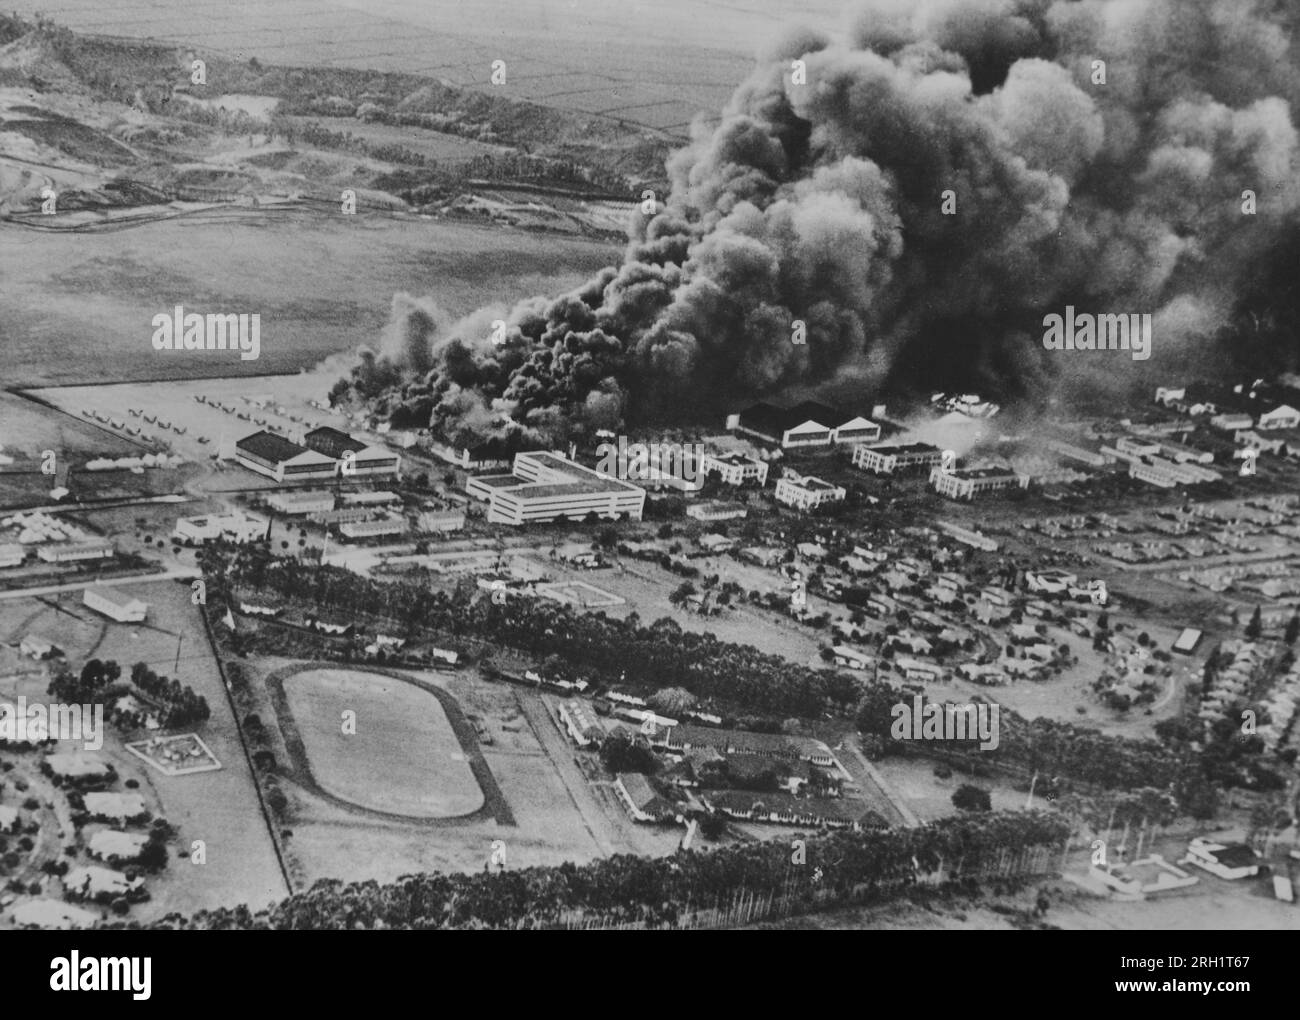 Attack on Pearl Harbor, December 7 1941. American aircraft and facilities at Wheeler Army Airfield burn during the Japanese attack on Pearl Harbor, December 7 1941. Stock Photo